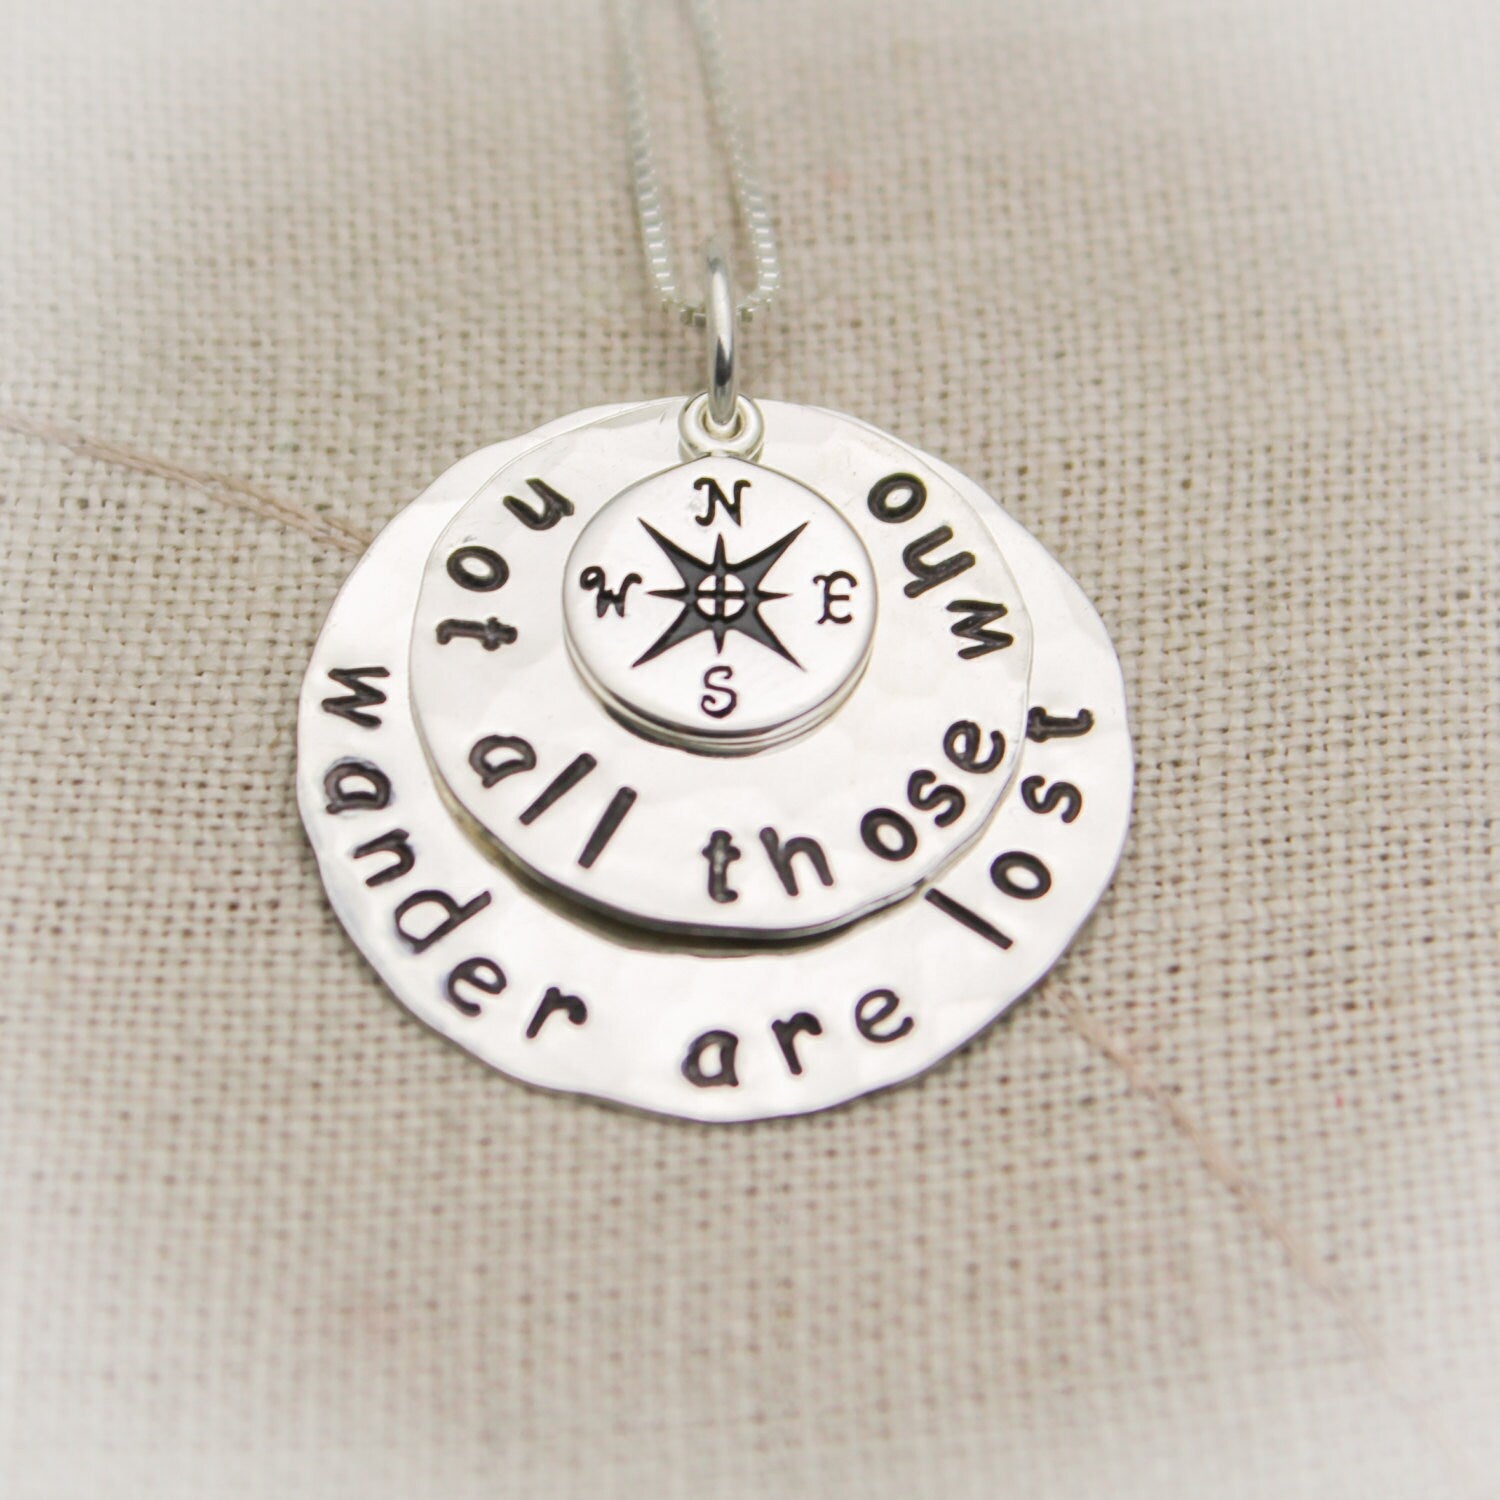 Not All Those Who Wander Are Lost  Necklace Jewelry Compass Necklace Traveler Gift Graduation Gift Hand Stamped Jewelry